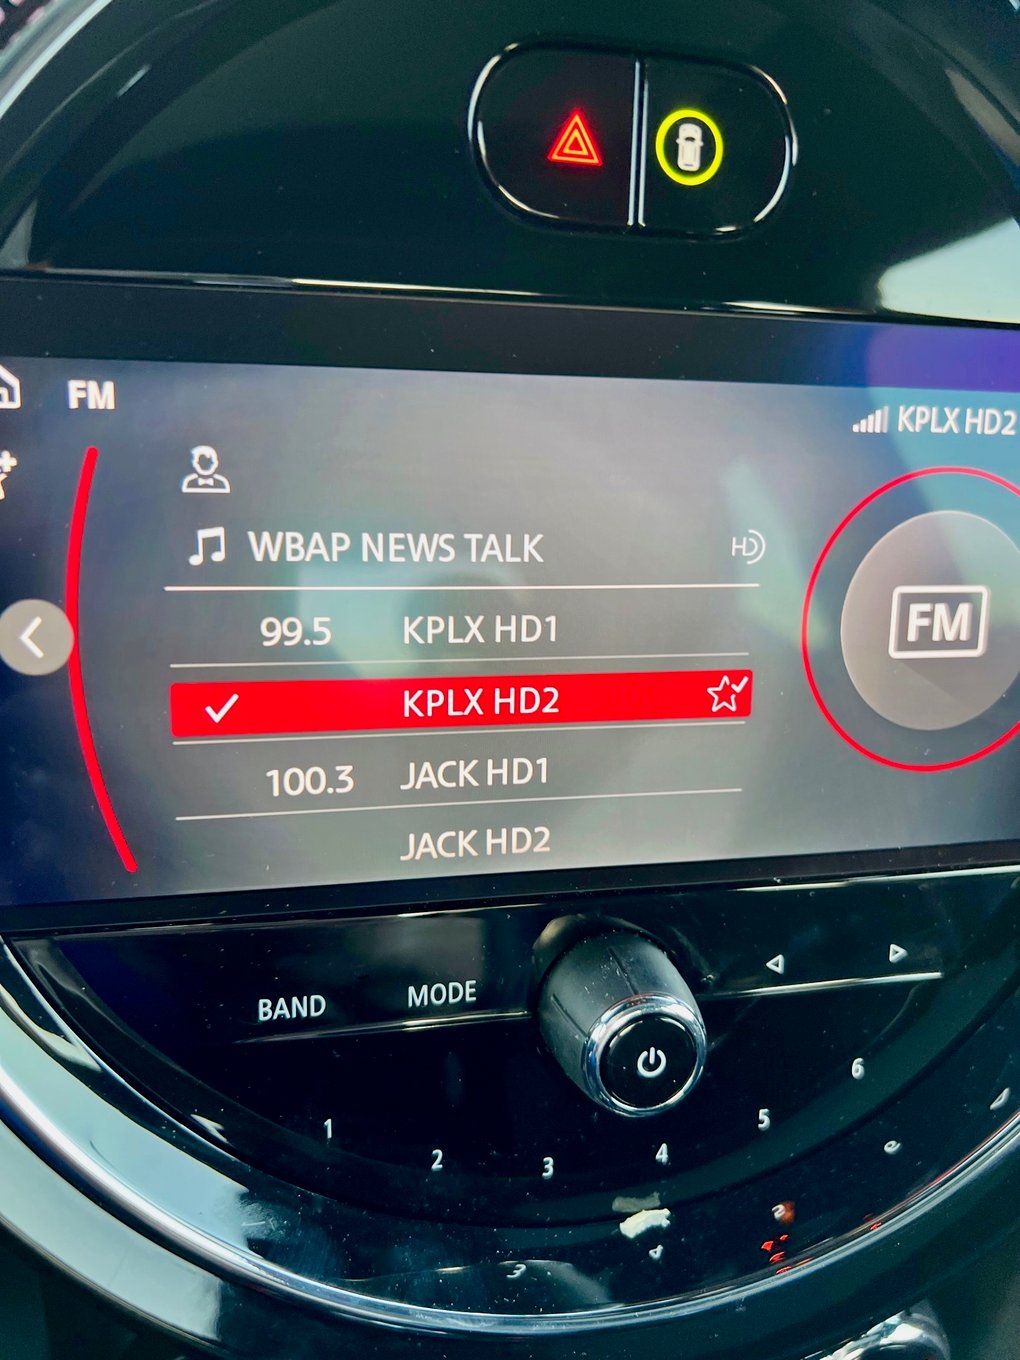 How to recover your Ford radio code - Car Blog